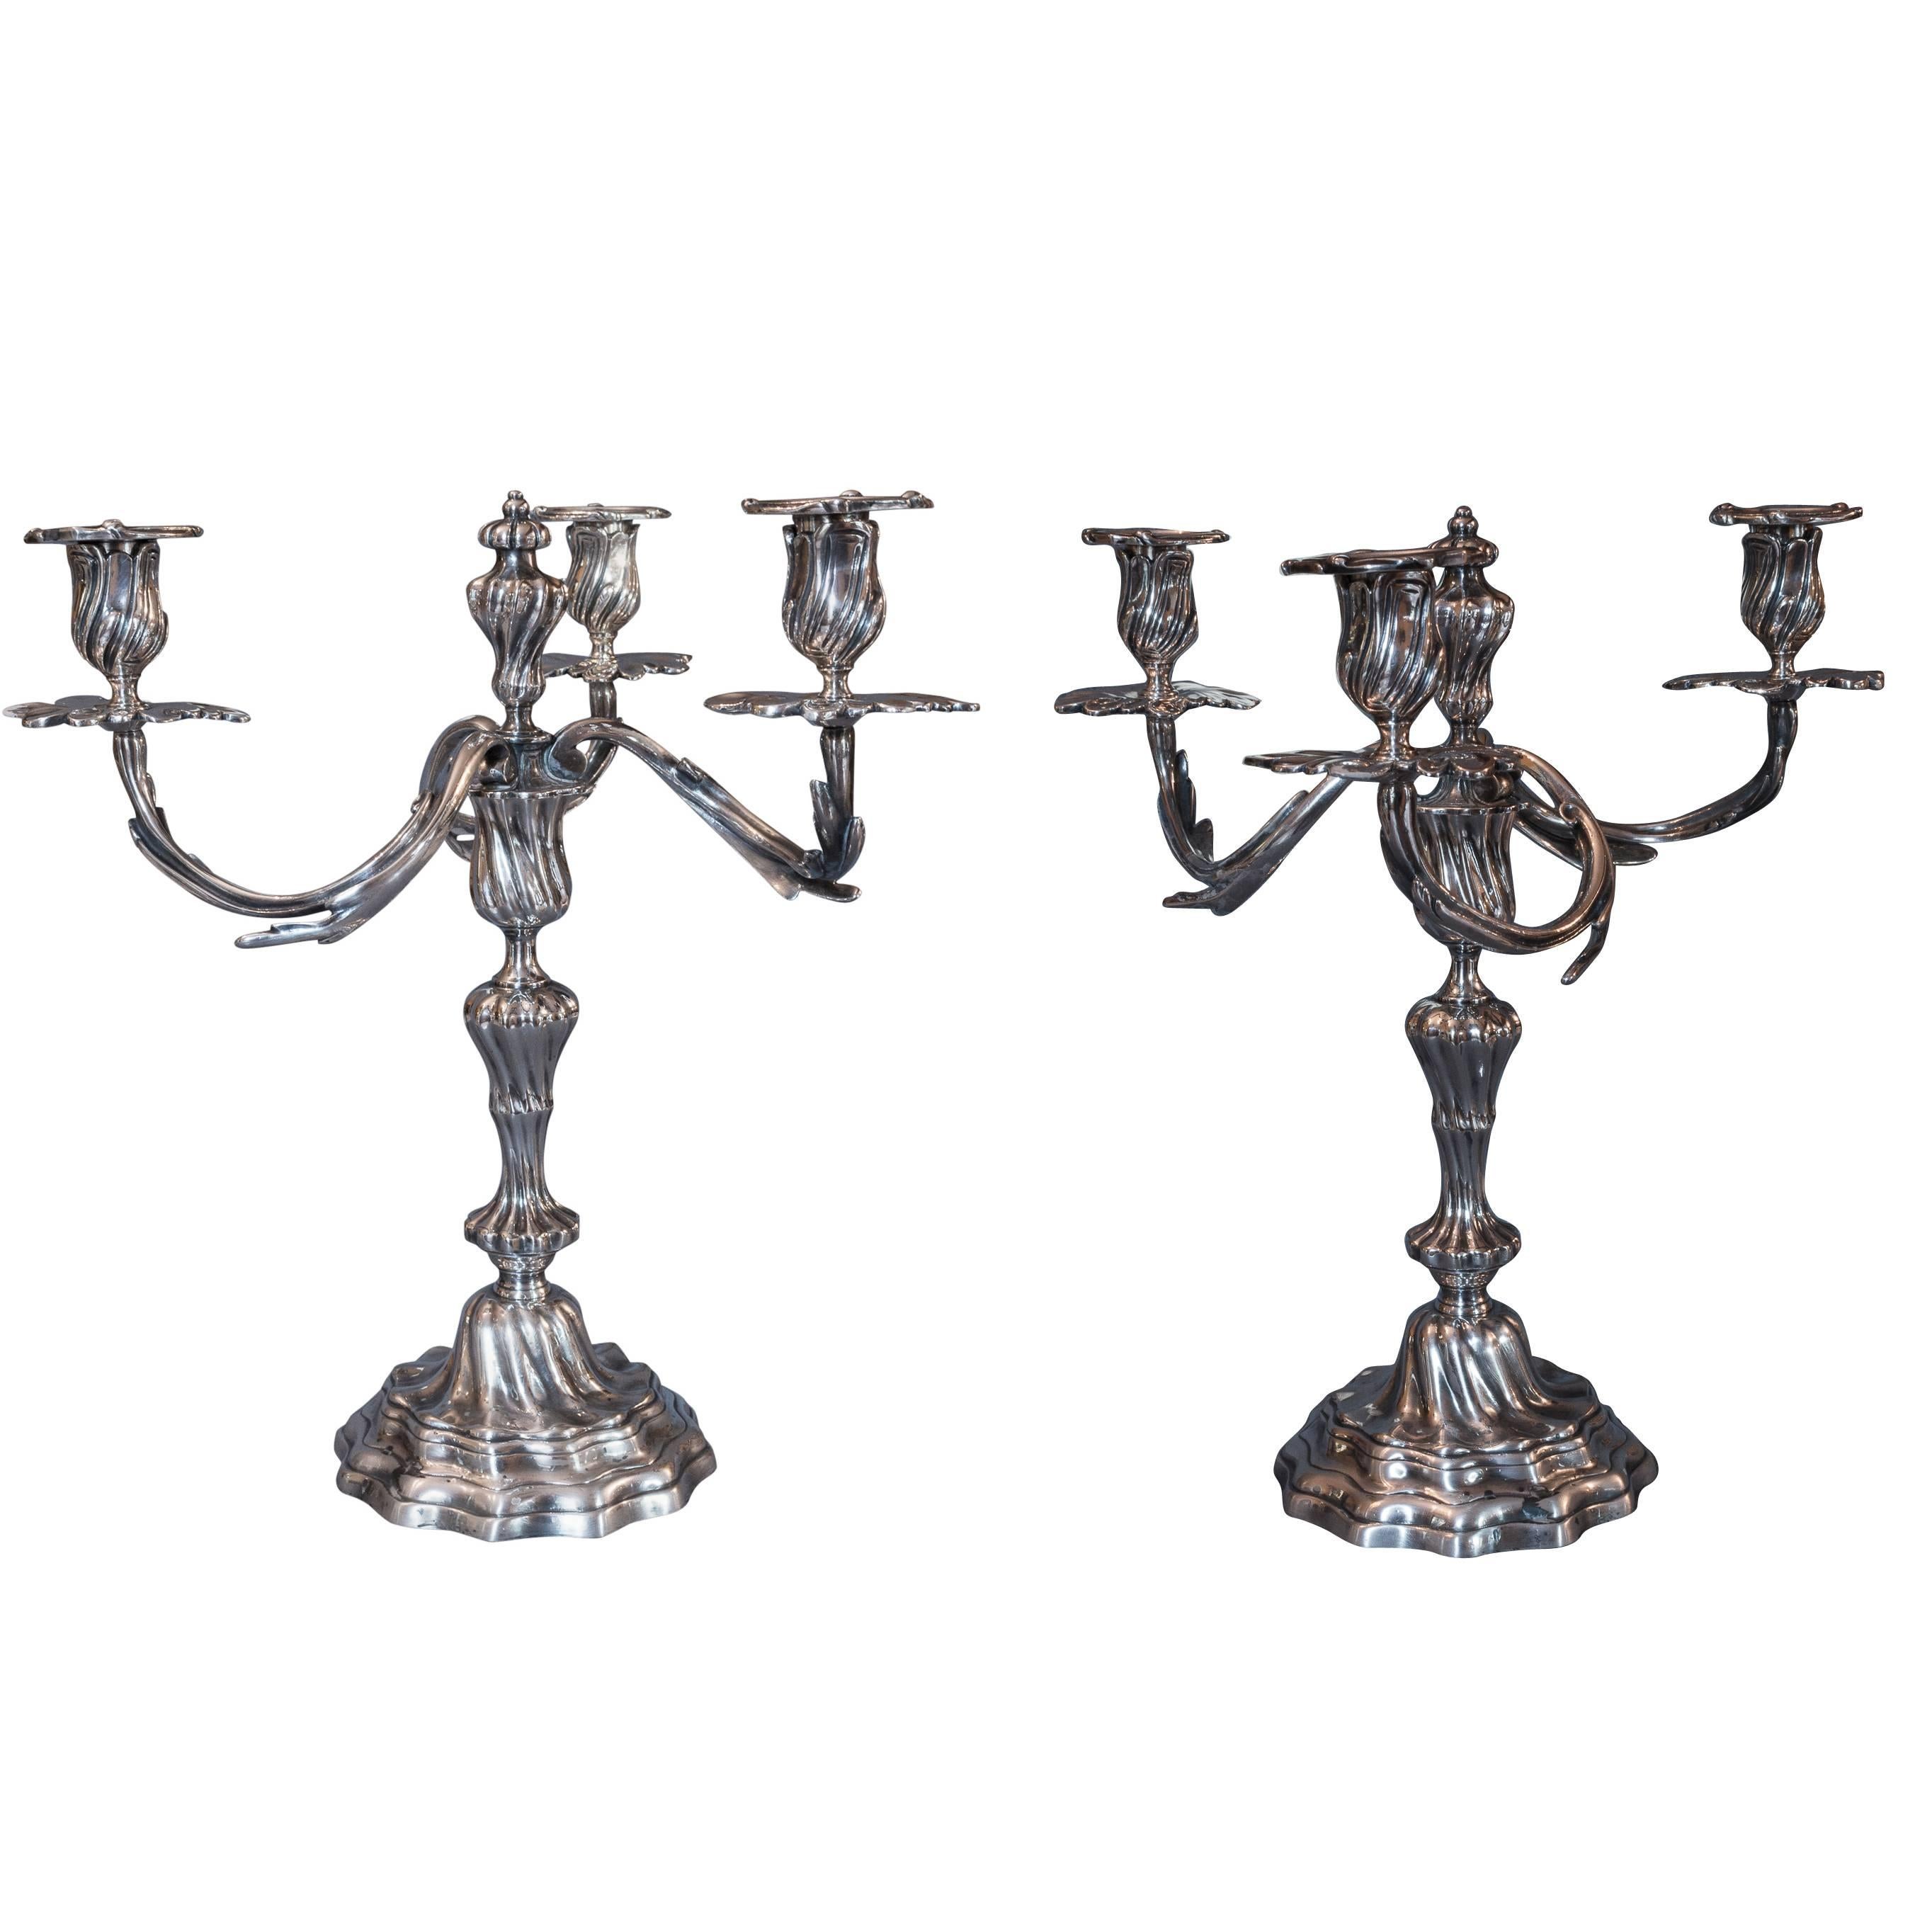 French Louis XV Style Pair of Silver Plate Candelabras, circa 1850-1860